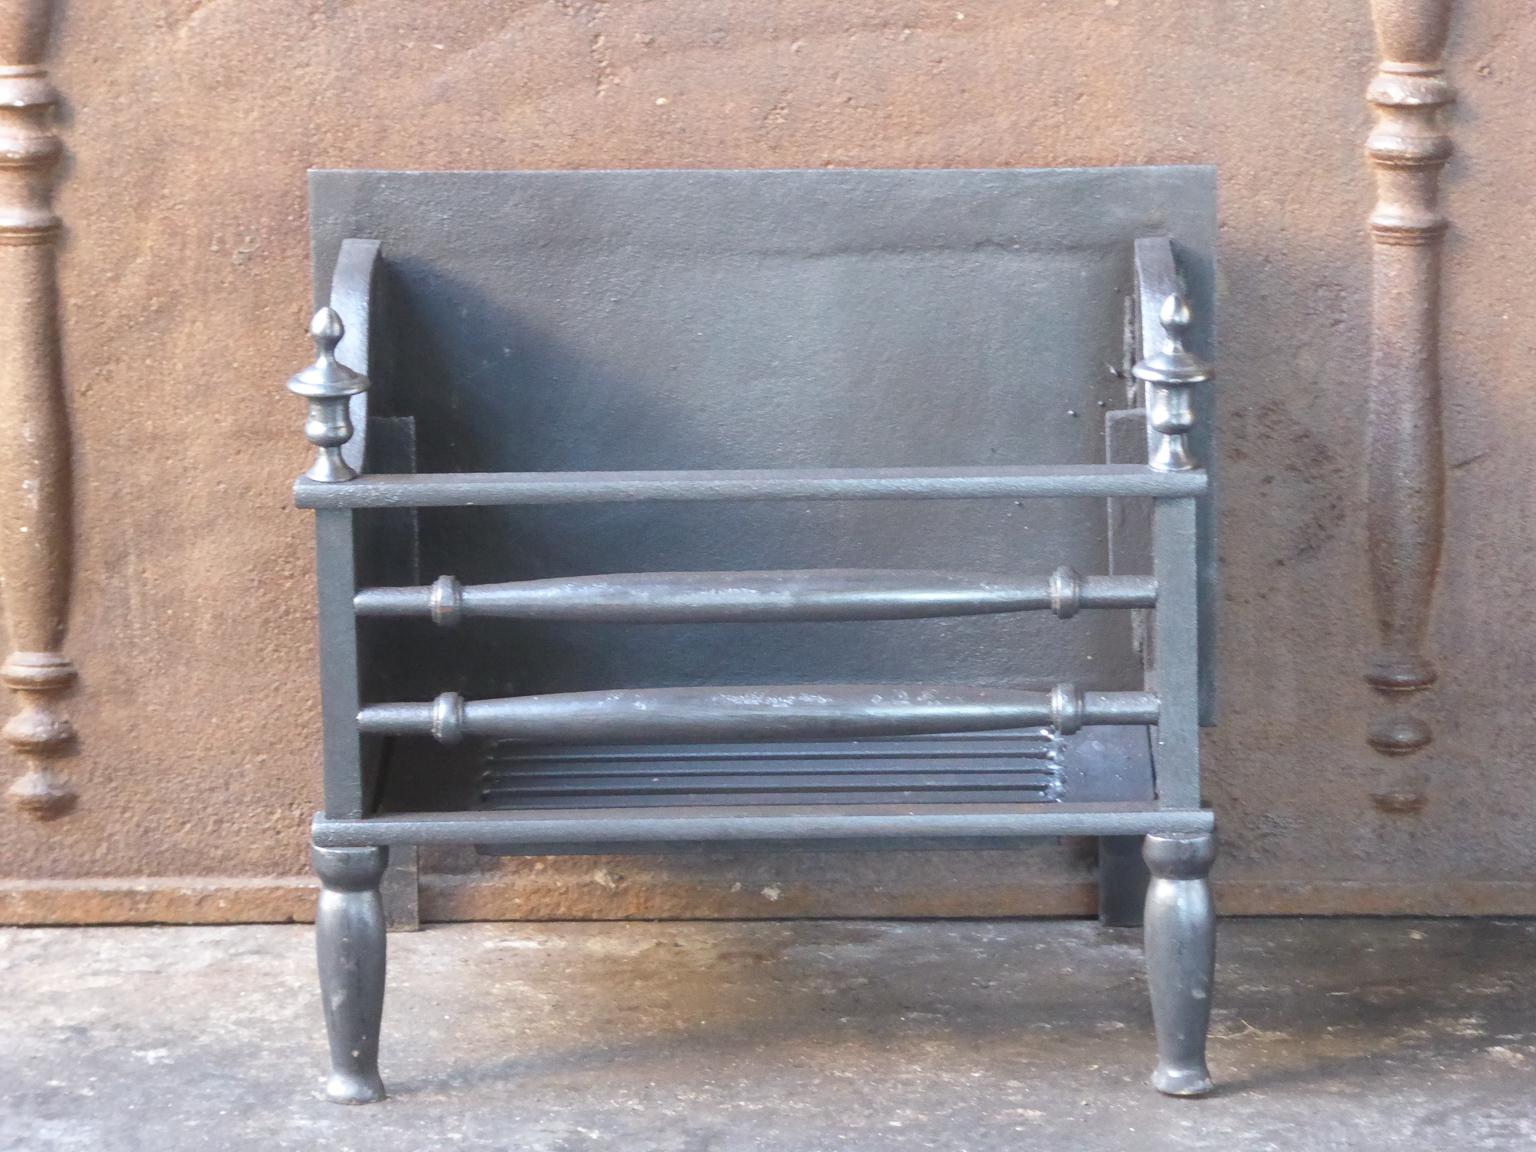 English Victorian style fireplace basket or fire basket. The fireplace grate is made of wrought iron and cast iron. 

















